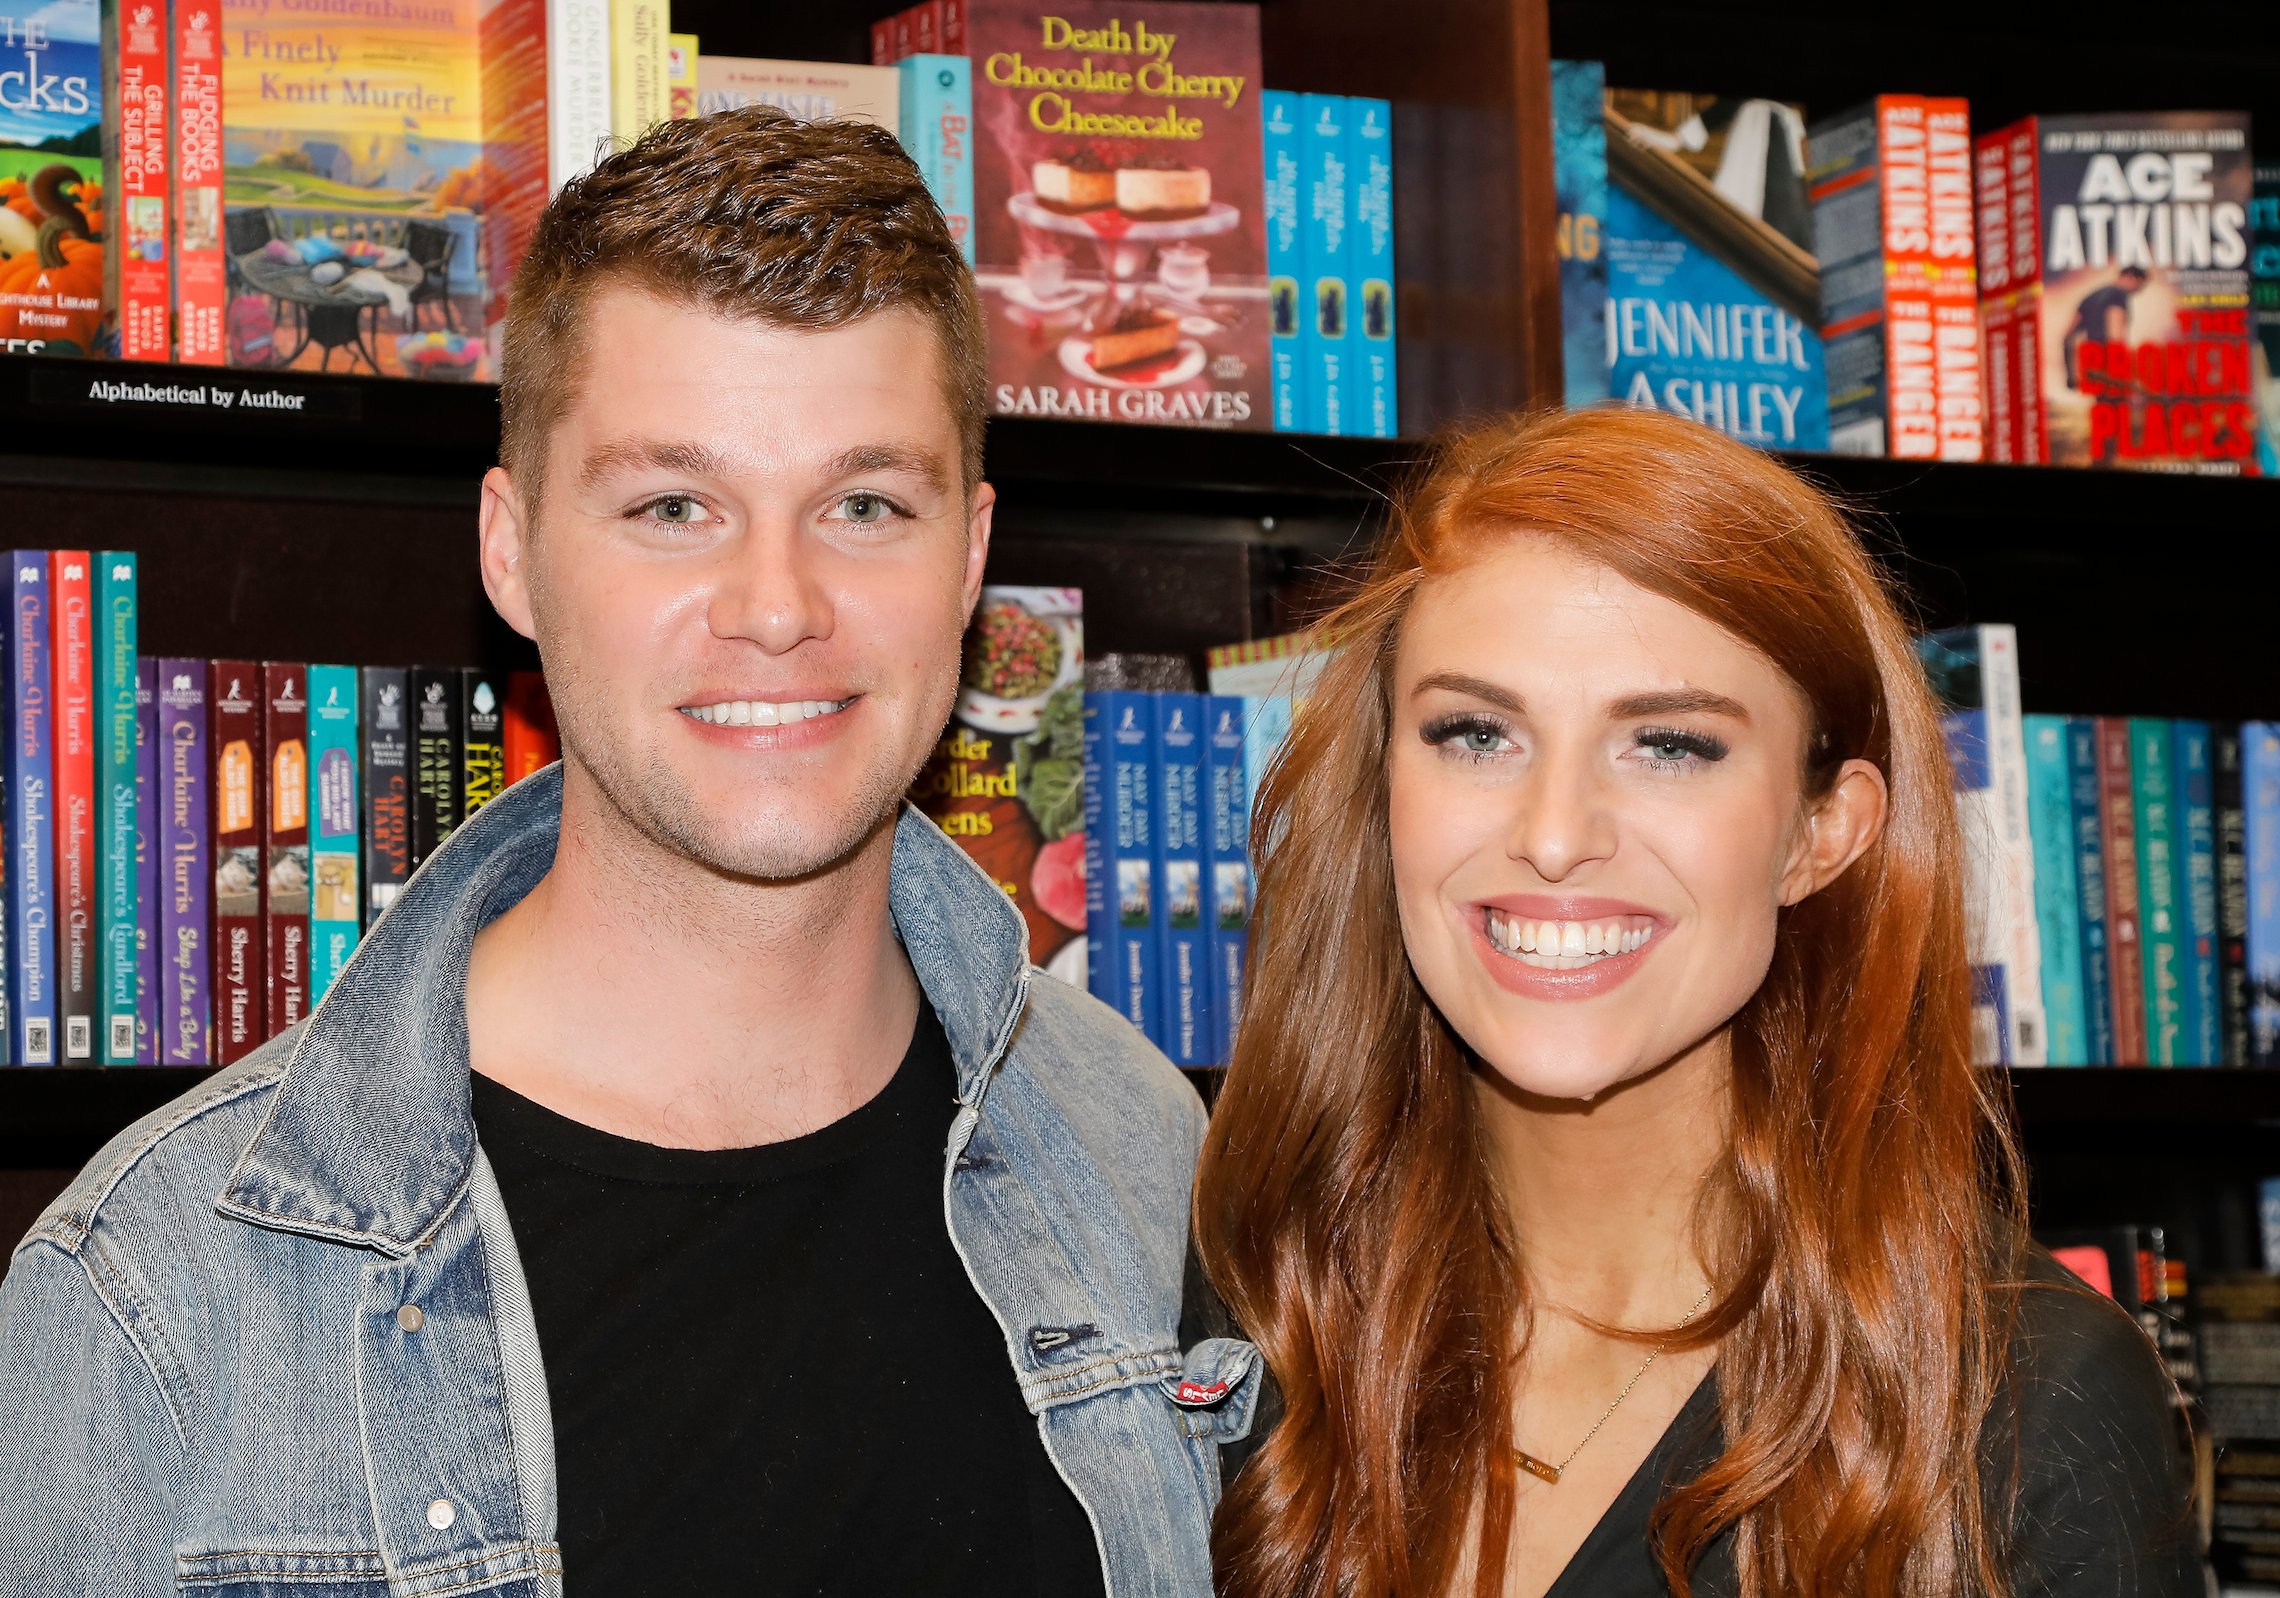 Jeremy Roloff and Audrey Roloff celebrate their new book ,'A Love Letter Life' 